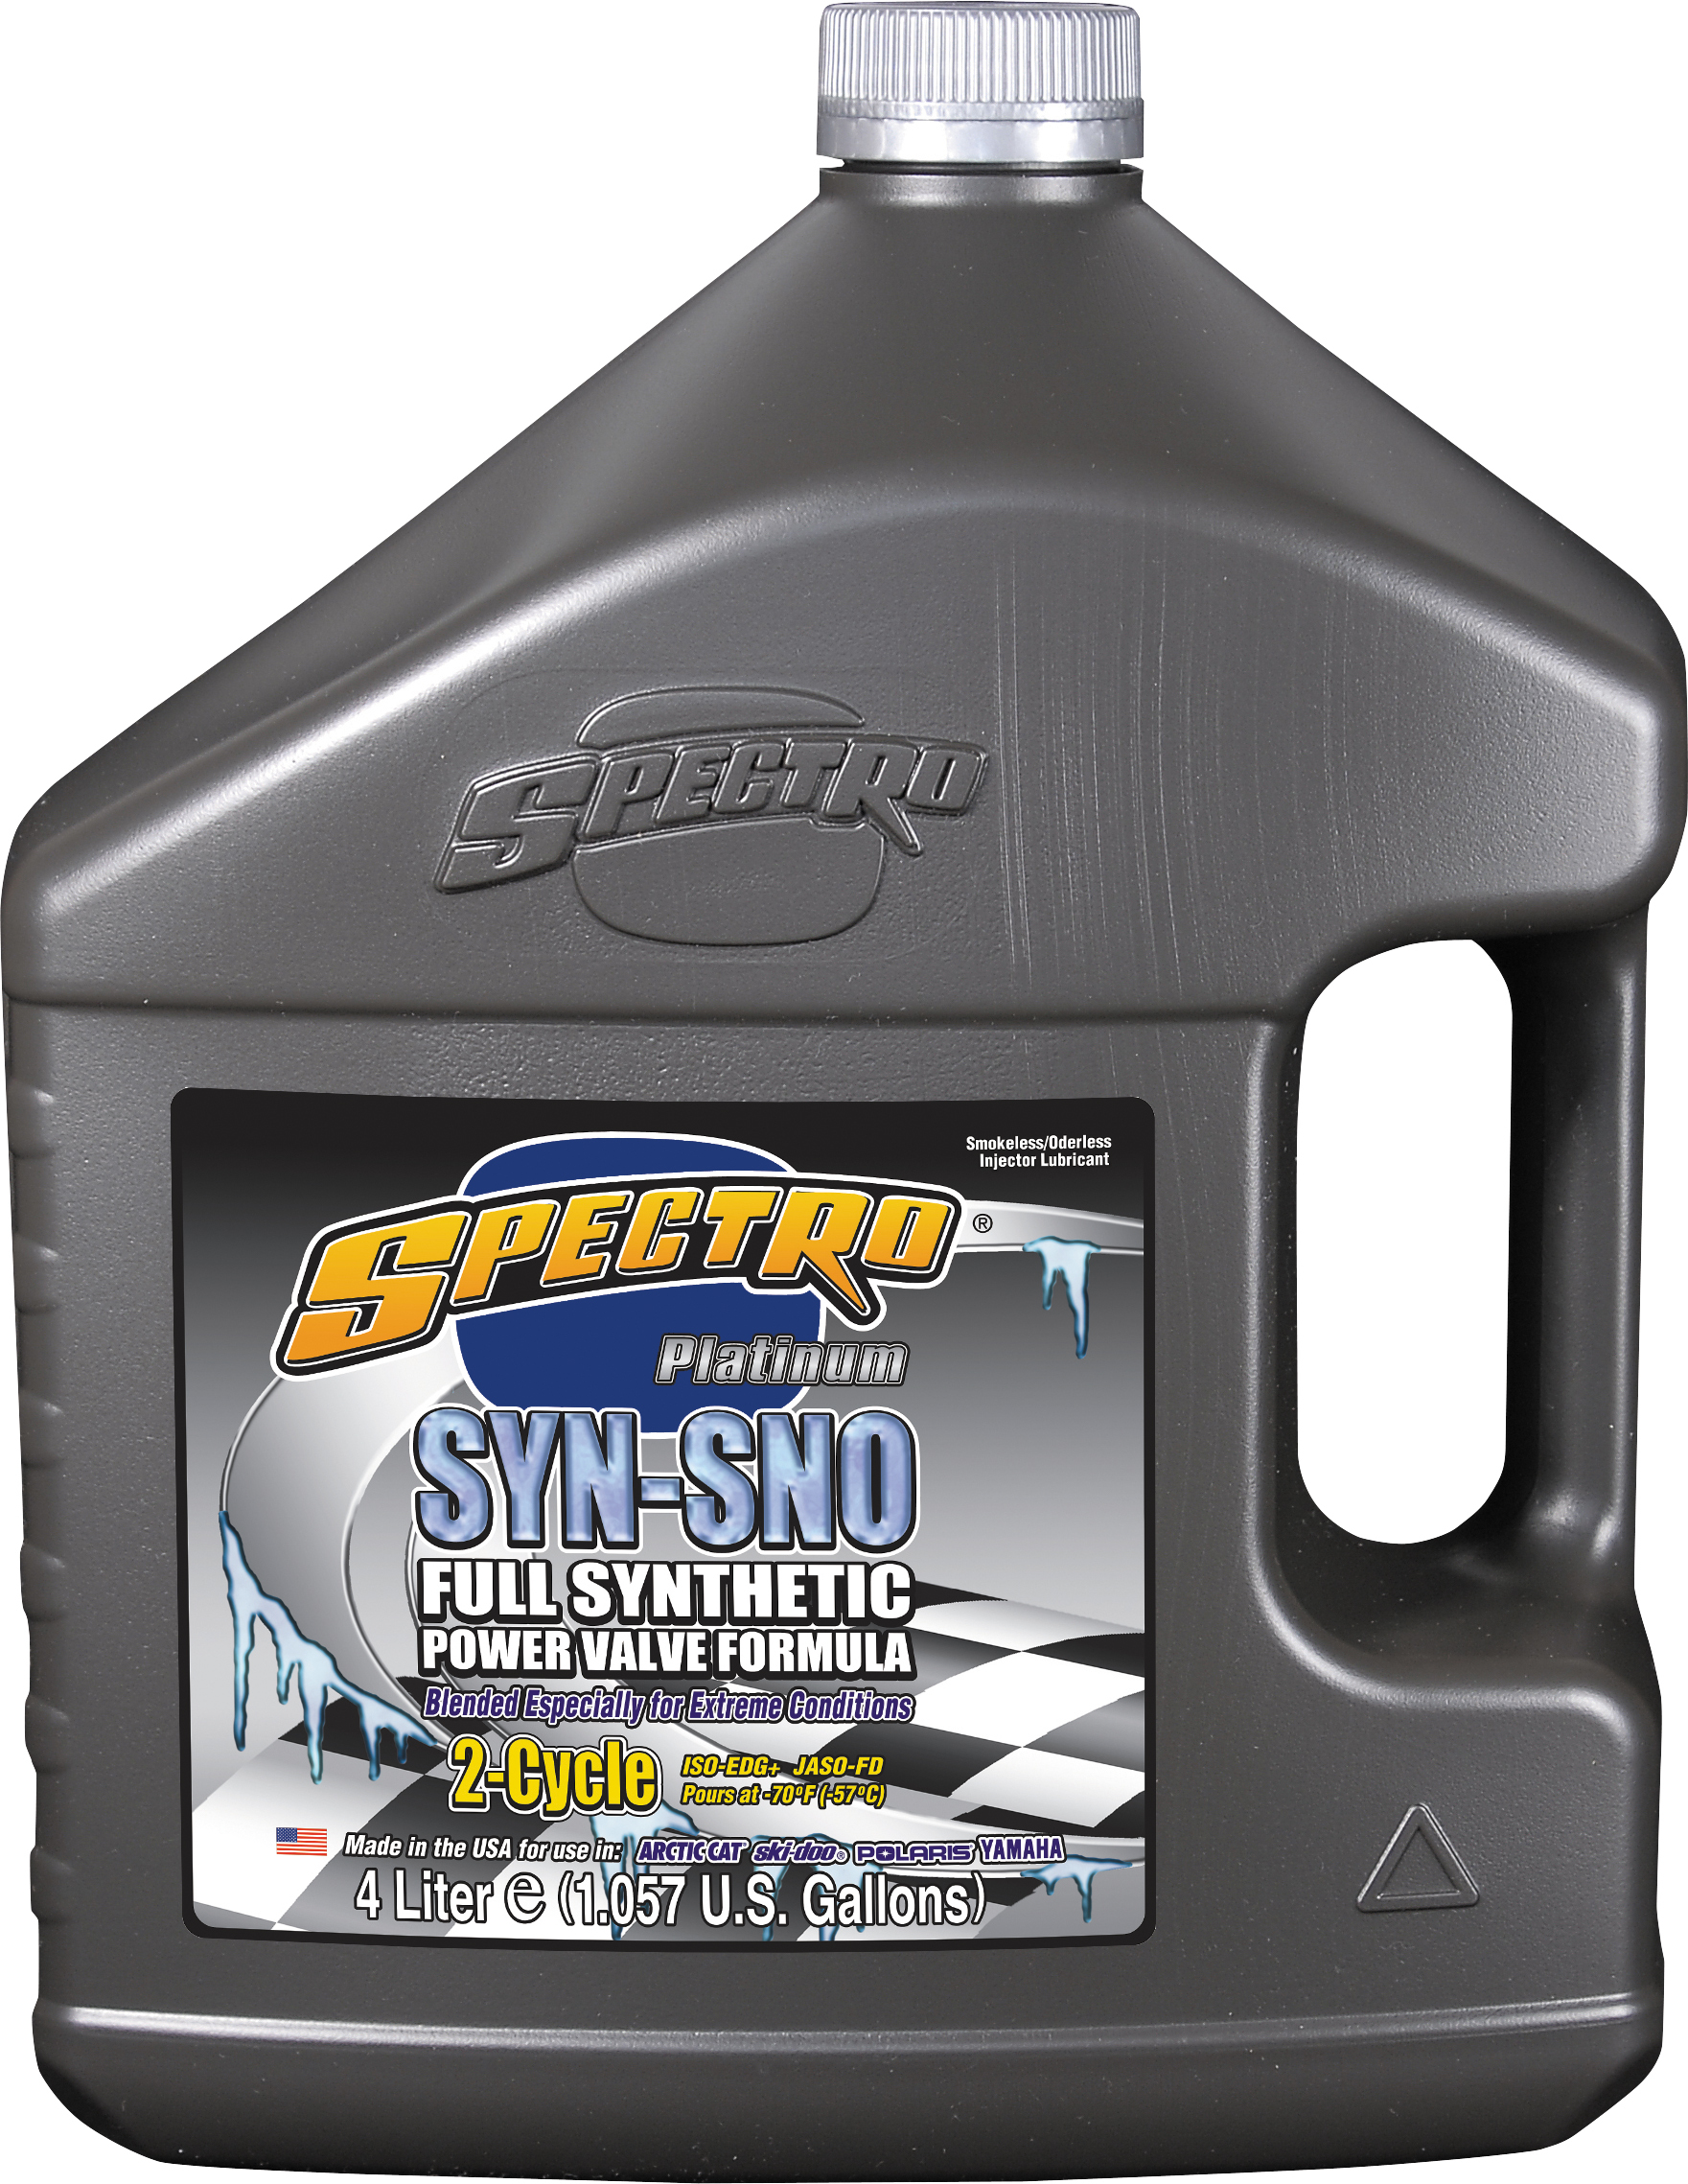 Spectro - Platinum Sno Synthetic 2t 1 Gal Powervalve Formula - T.SYNSNO